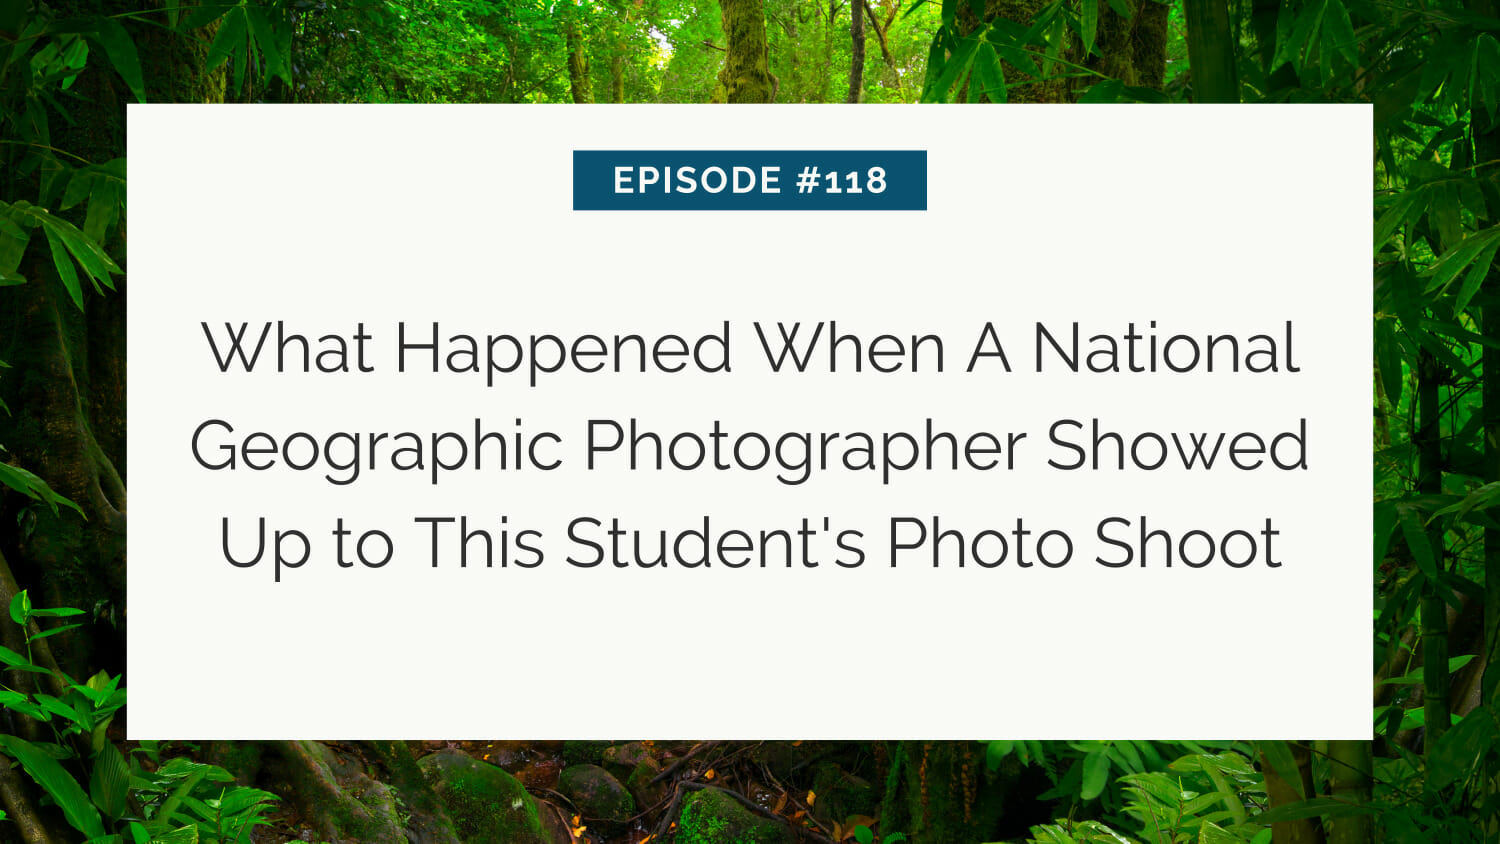 White text overlay on a background featuring lush greenery, promoting an episode about a national geographic photographer's encounter at a student's photo shoot.